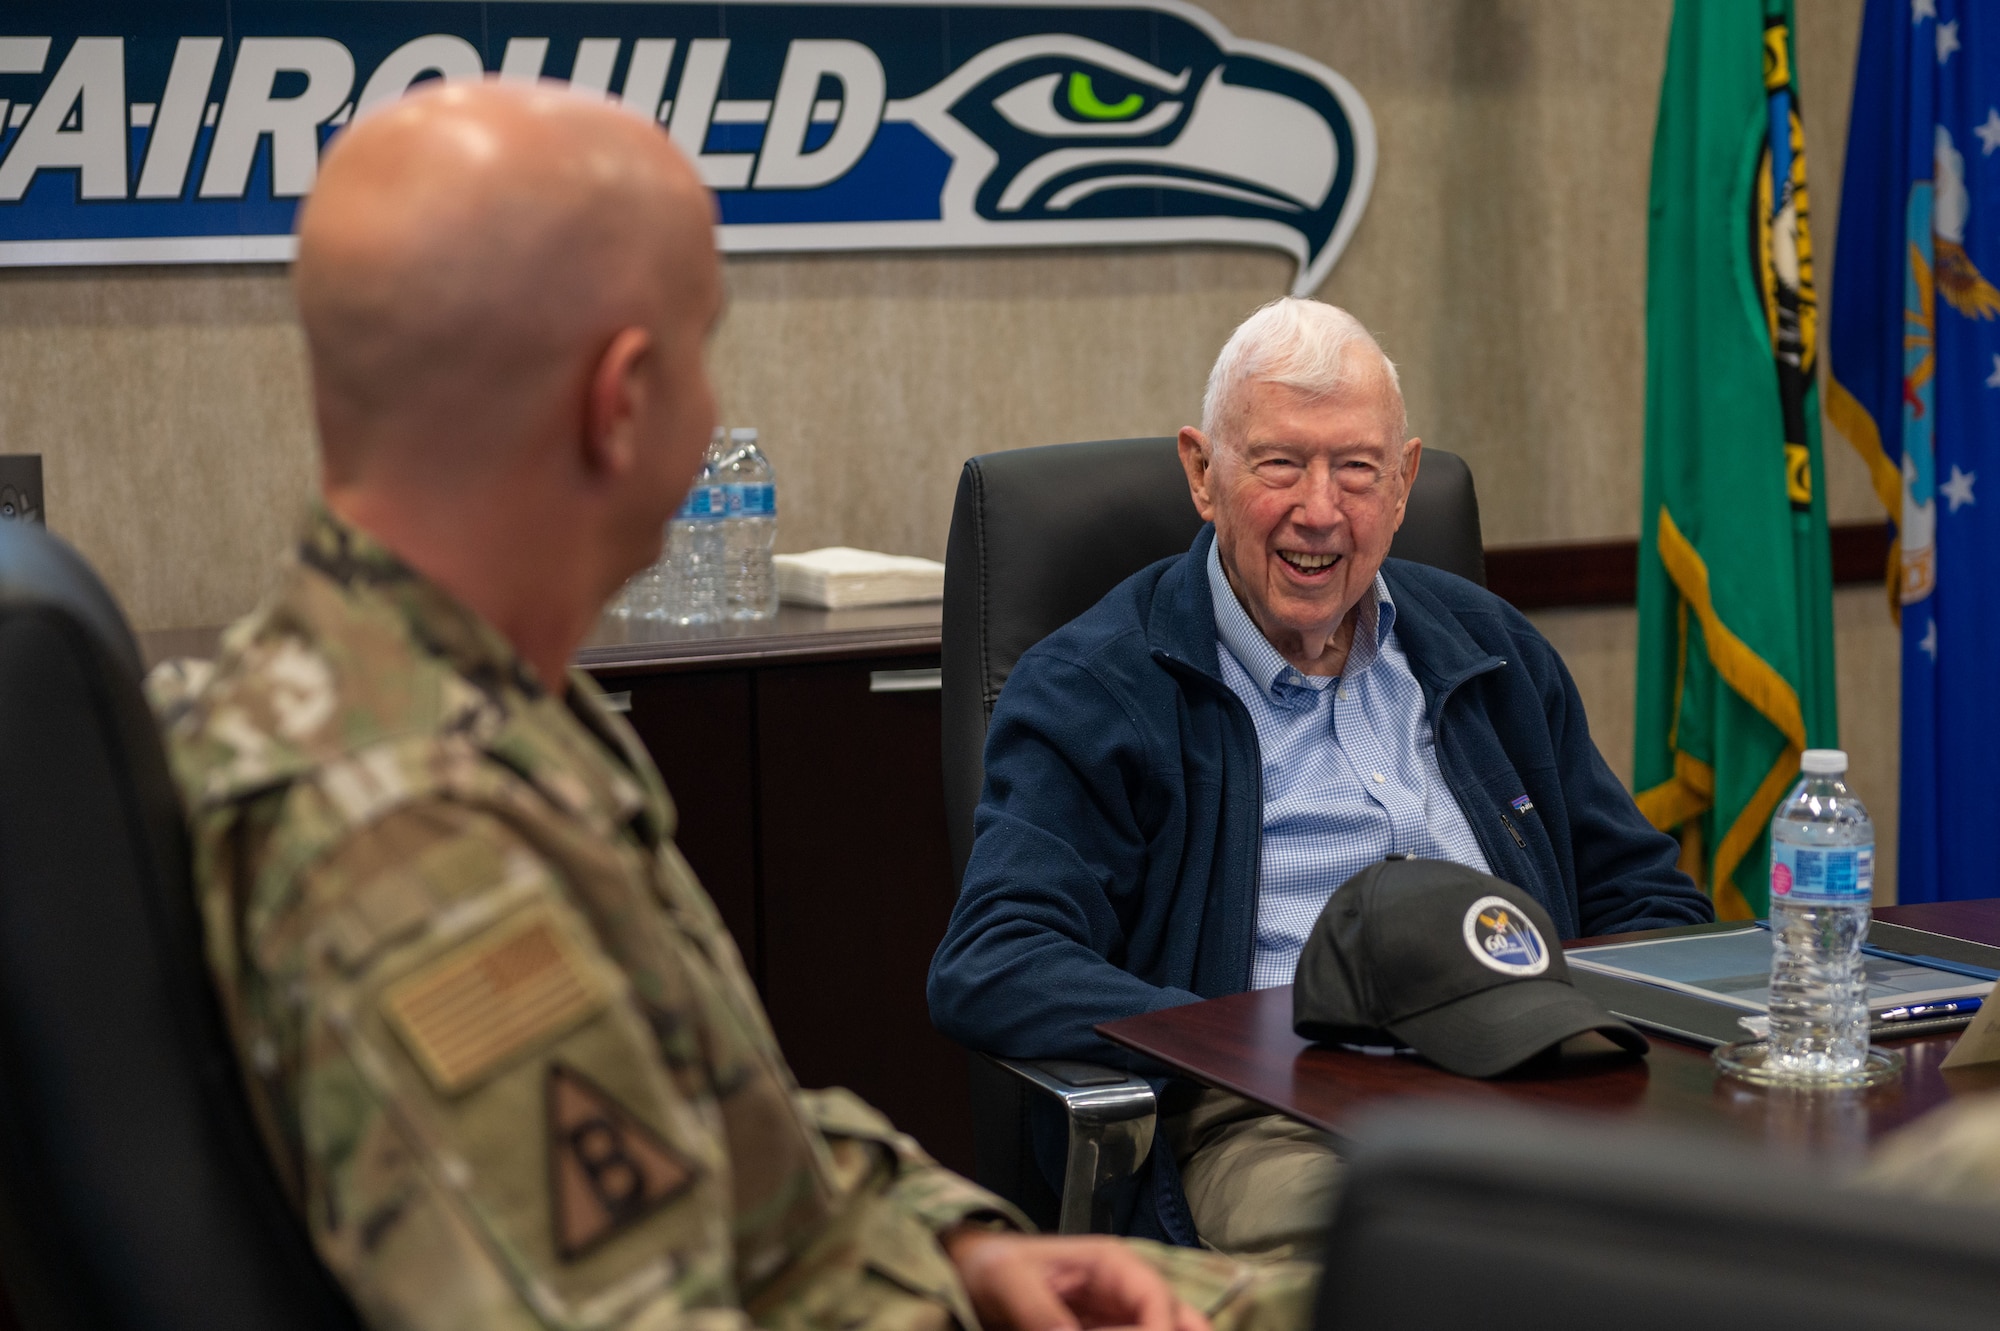 Retired Gen. John Shaud, former 92nd Bombardment wing commander, speaks with Col. Jeffrey Marshall, 92nd Air Refueling Wing vice commander at Fairchild Air Force Base, Washington, August 22, 2022. Shaud’s last act as the wing commander of the 92nd Bombardment Wing was coordinating the response to the Mount Saint Helens eruption in May 1980. (U.S. Air Force photo by Airman 1st Class Morgan Dailey)